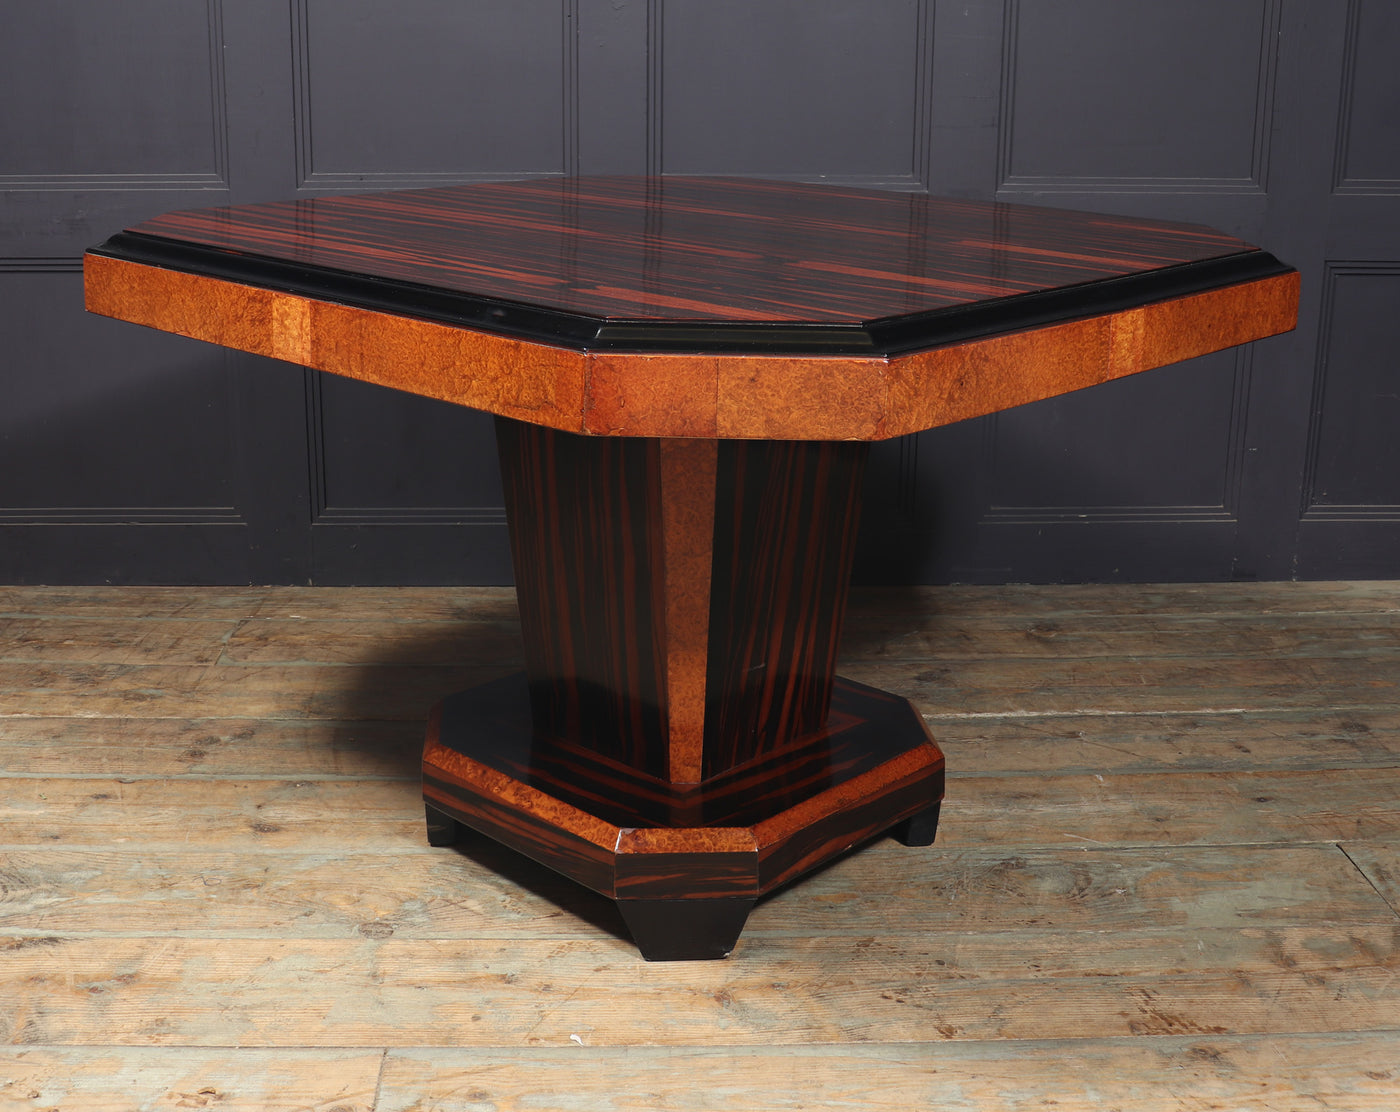 French Art Deco Dining Table